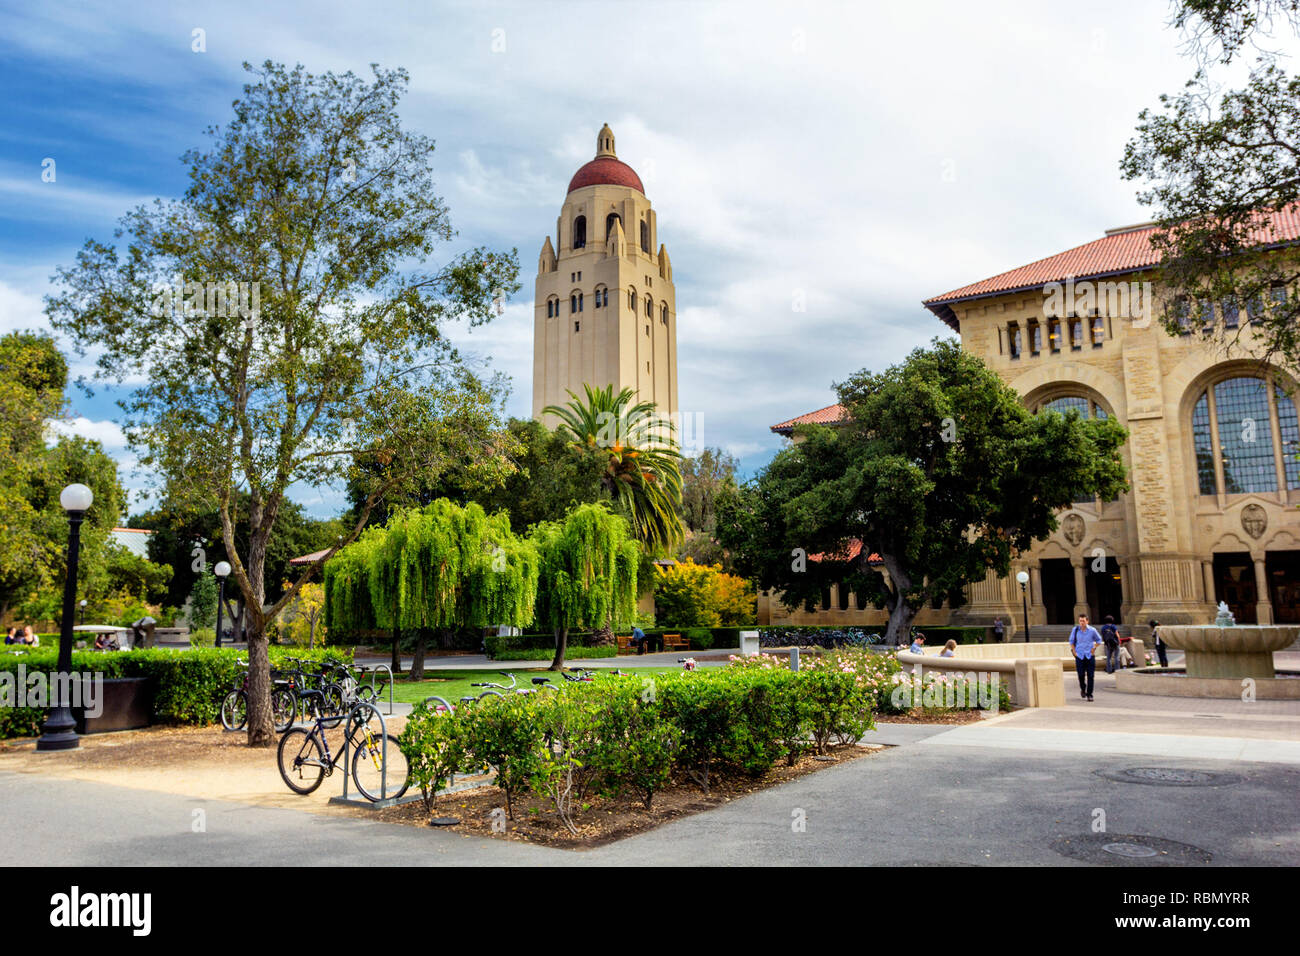 PALO ALTO, USA - OCTOBER, 2013: Hoover tower and green trees in Stanford University campus Stock Photo